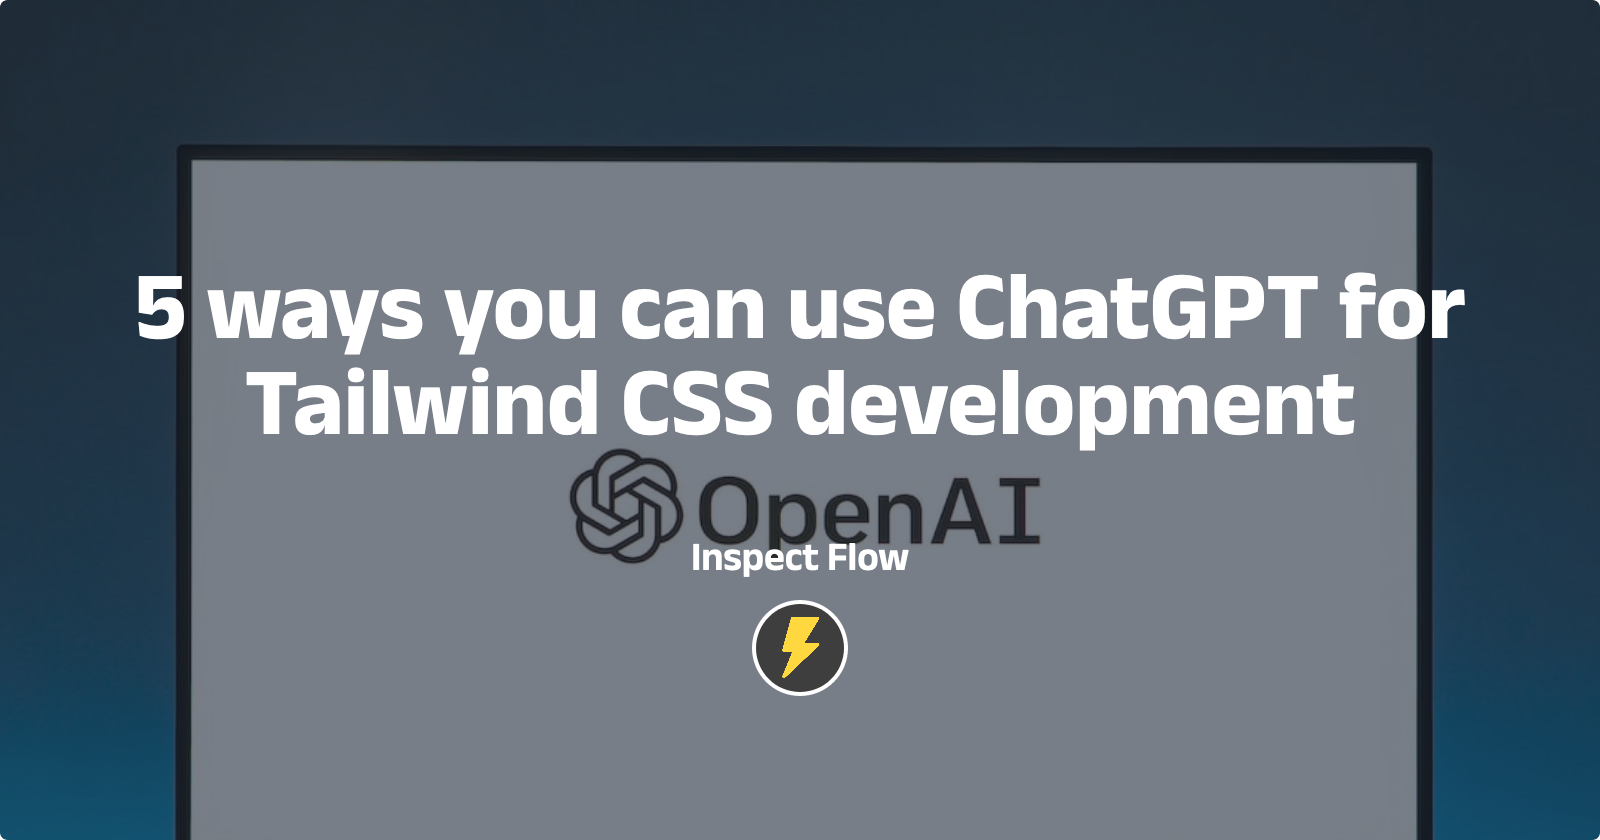 5-ways-you-can-use-chatgpt-for-tailwind-css-development image